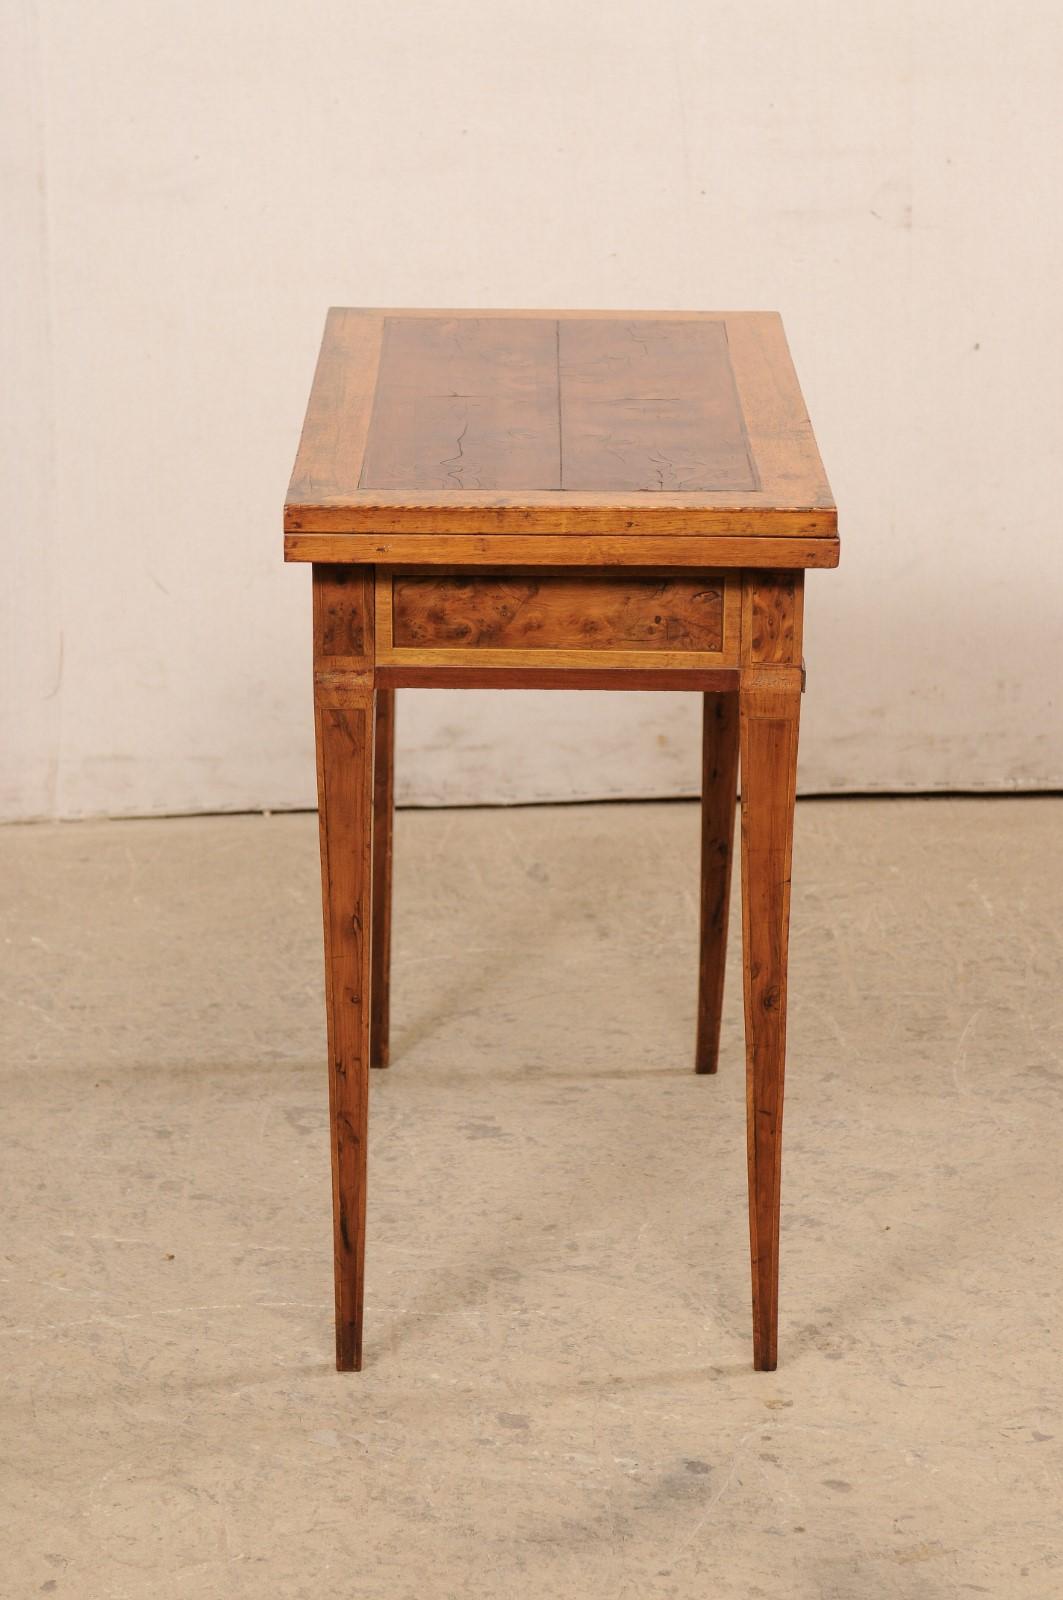 Wood 19th C. French Petite-Size Flip Top Table 'Transitional to a Card/Games Table' For Sale